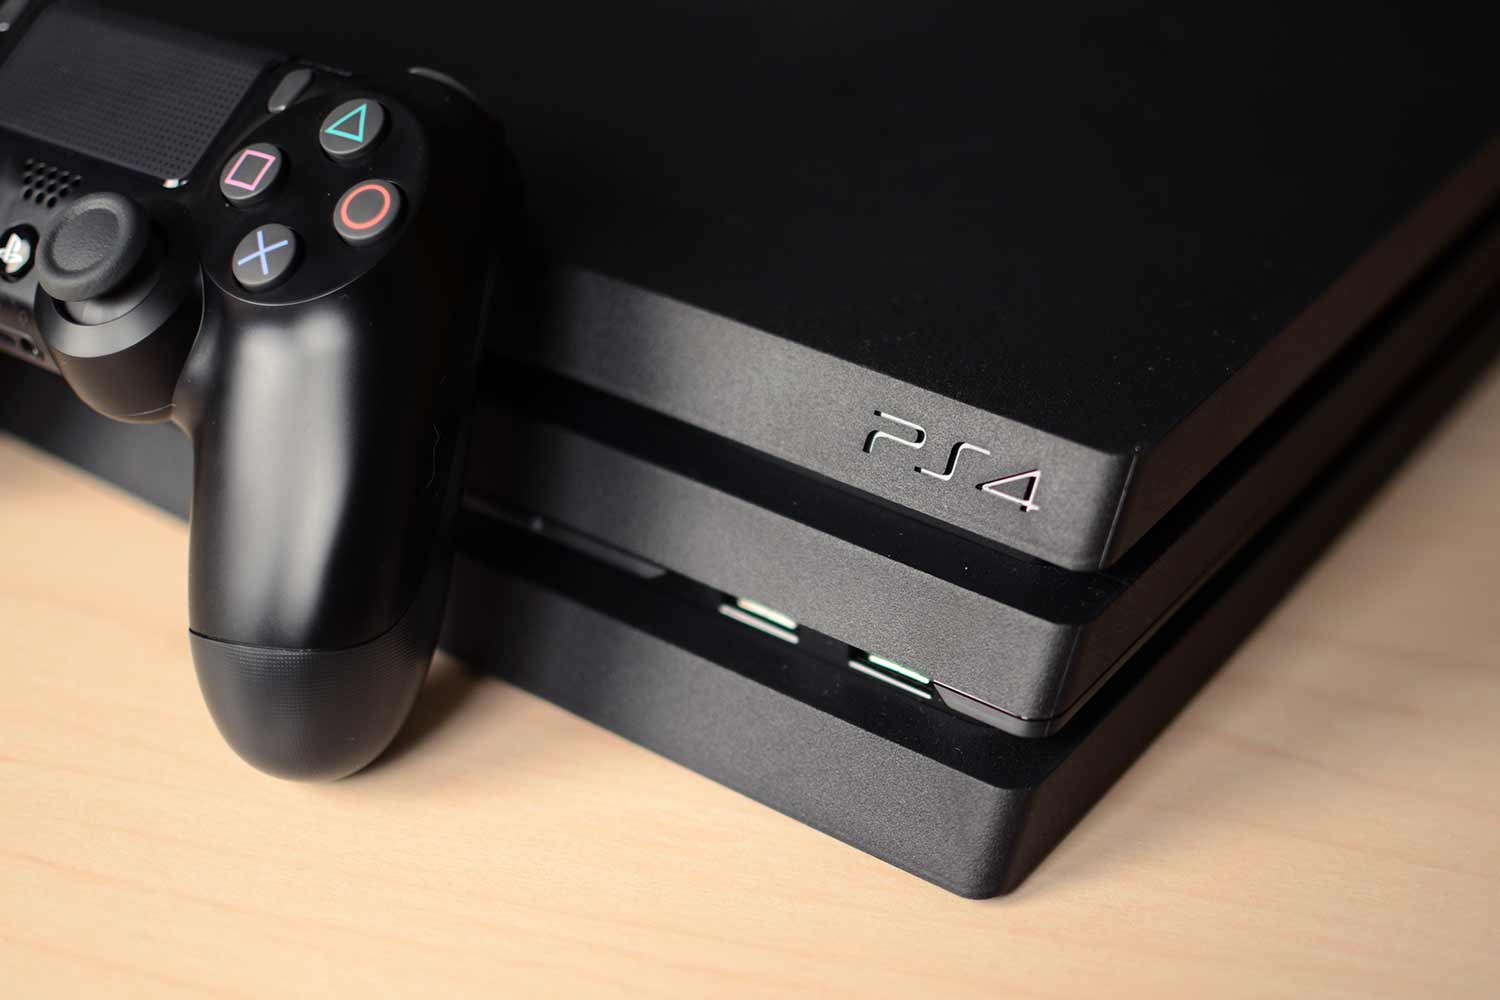 Sony PlayStation 4 Pro Review 2020: 4K at a Price | Digital Trends